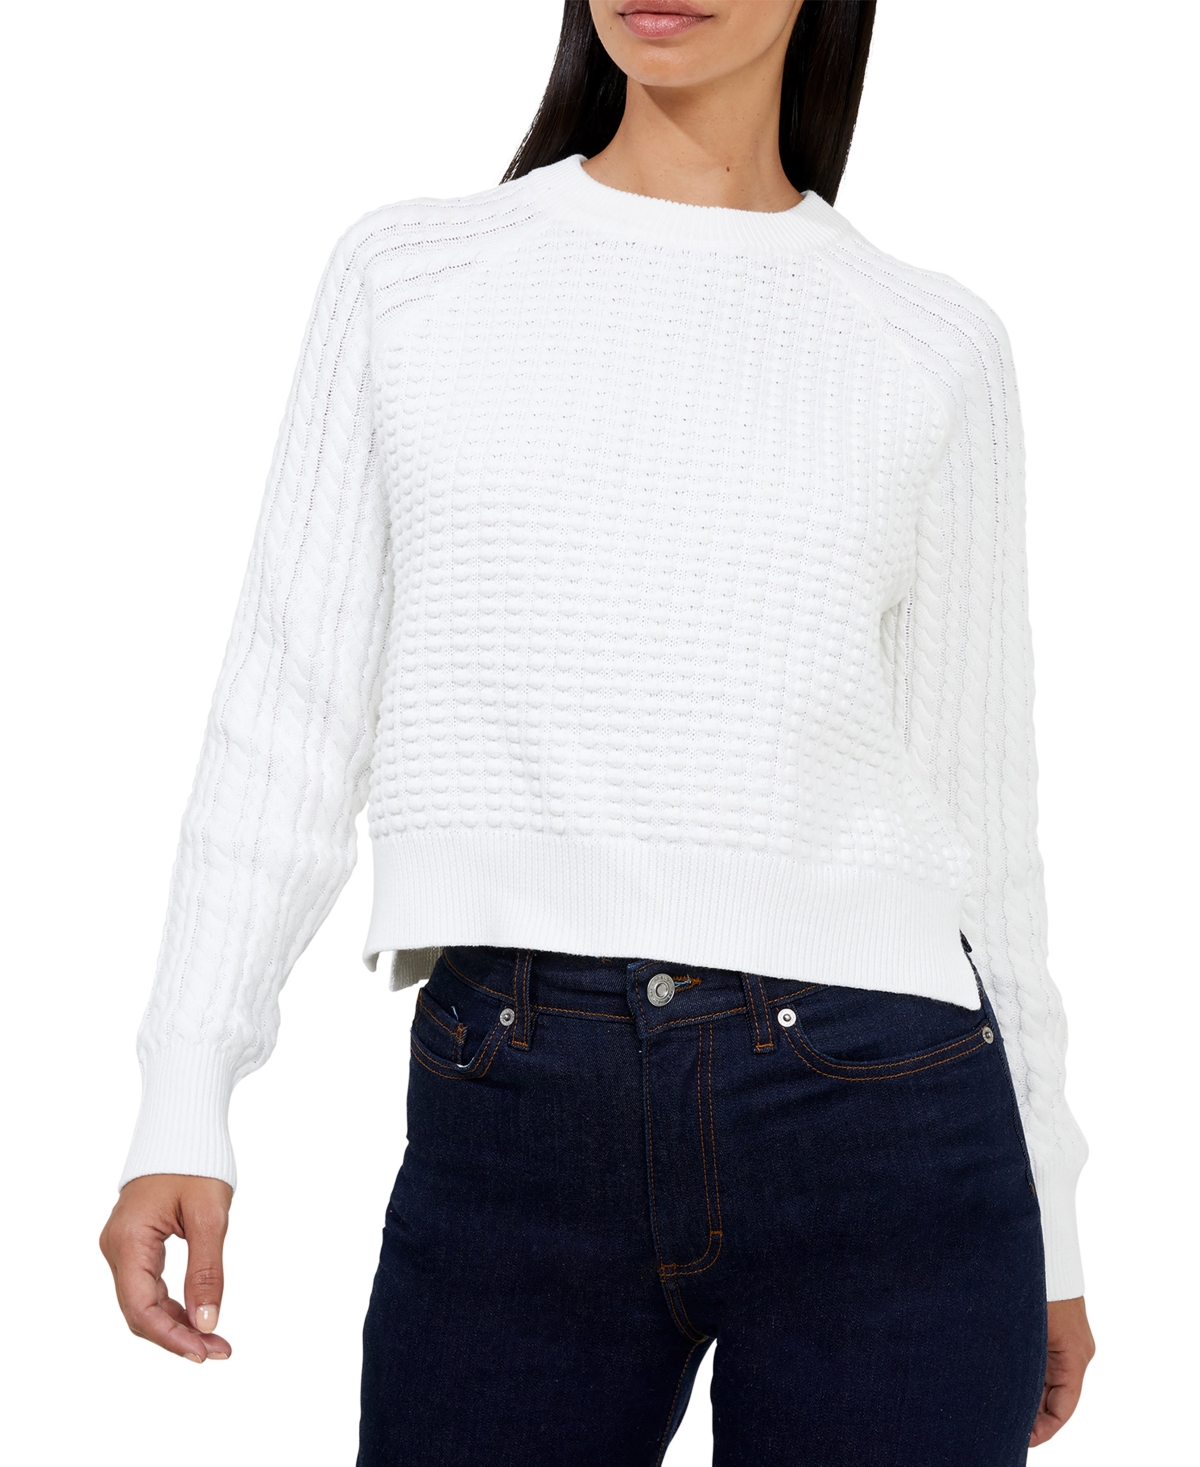 FRENCH CONNECTION WOMEN'S MOZART POPCORN COTTON SWEATER